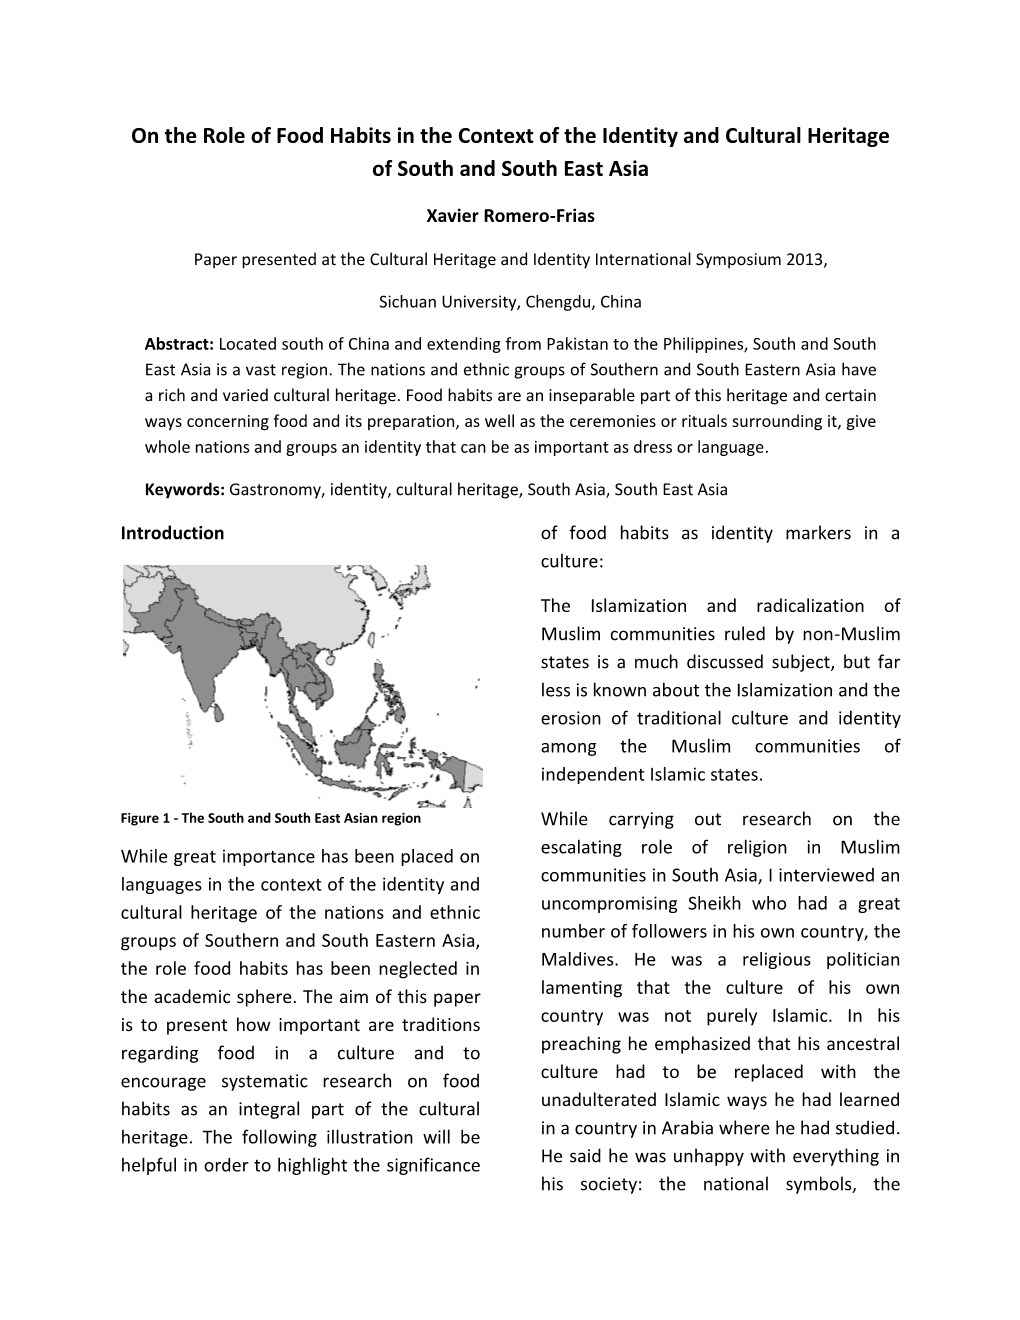 On the Role of Food Habits in the Context of the Identity and Cultural Heritage of South and South East Asia